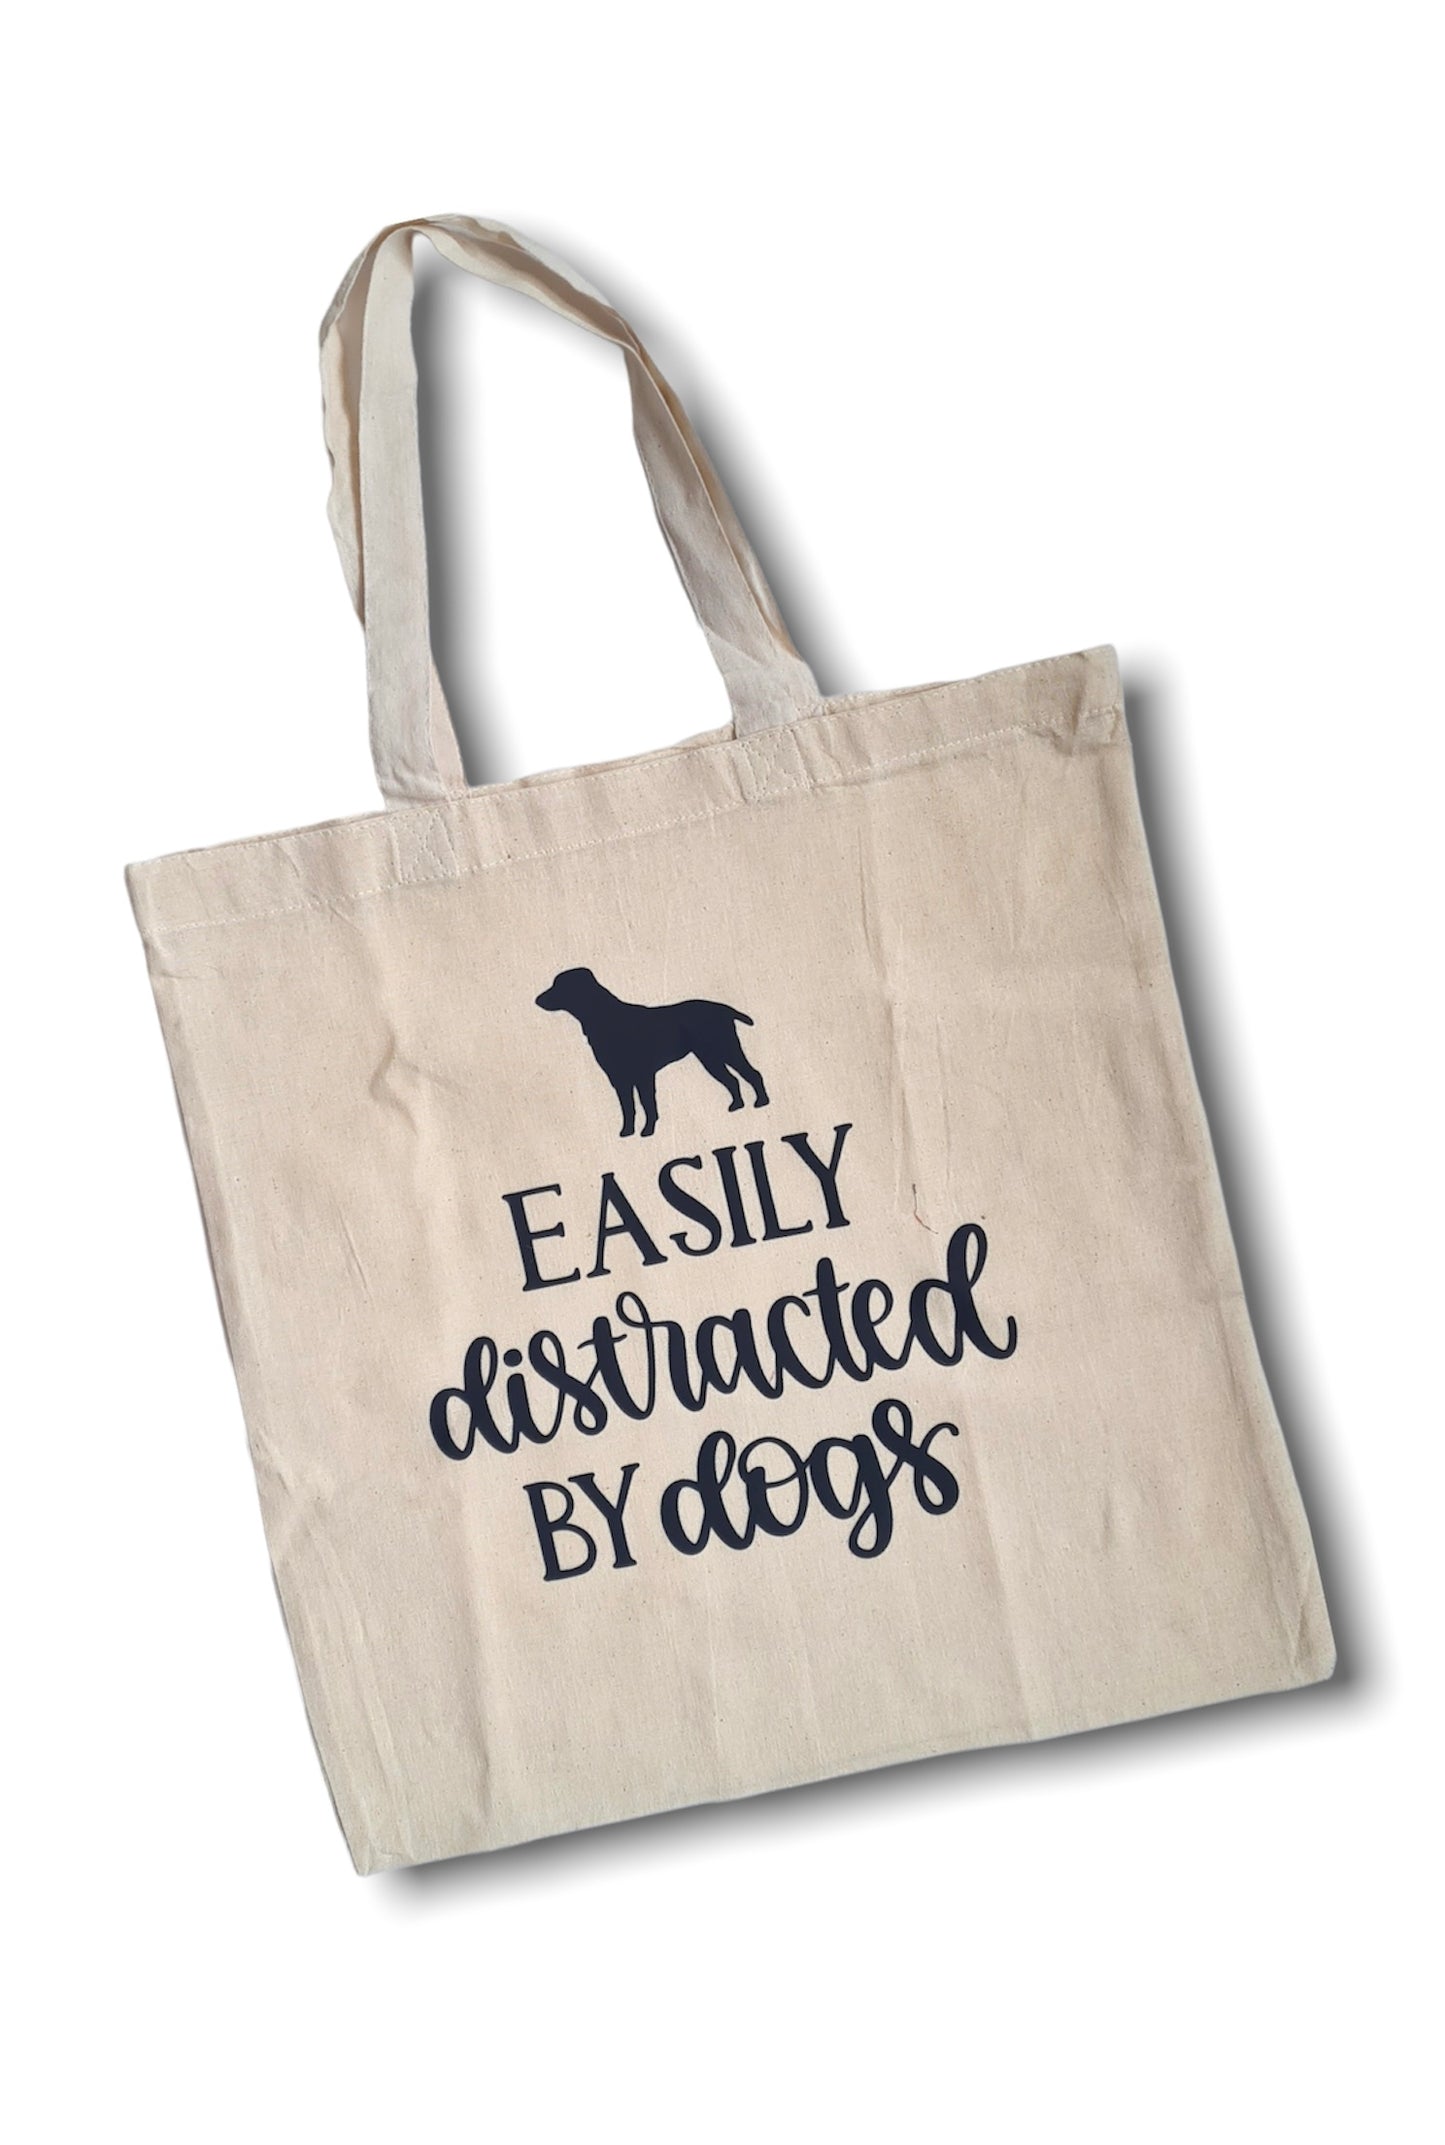 ‘Easily distracted by dogs’Reusable medium sized lightweight tote shopping bag 100% cotton tote bag, Eco friendly bag for life